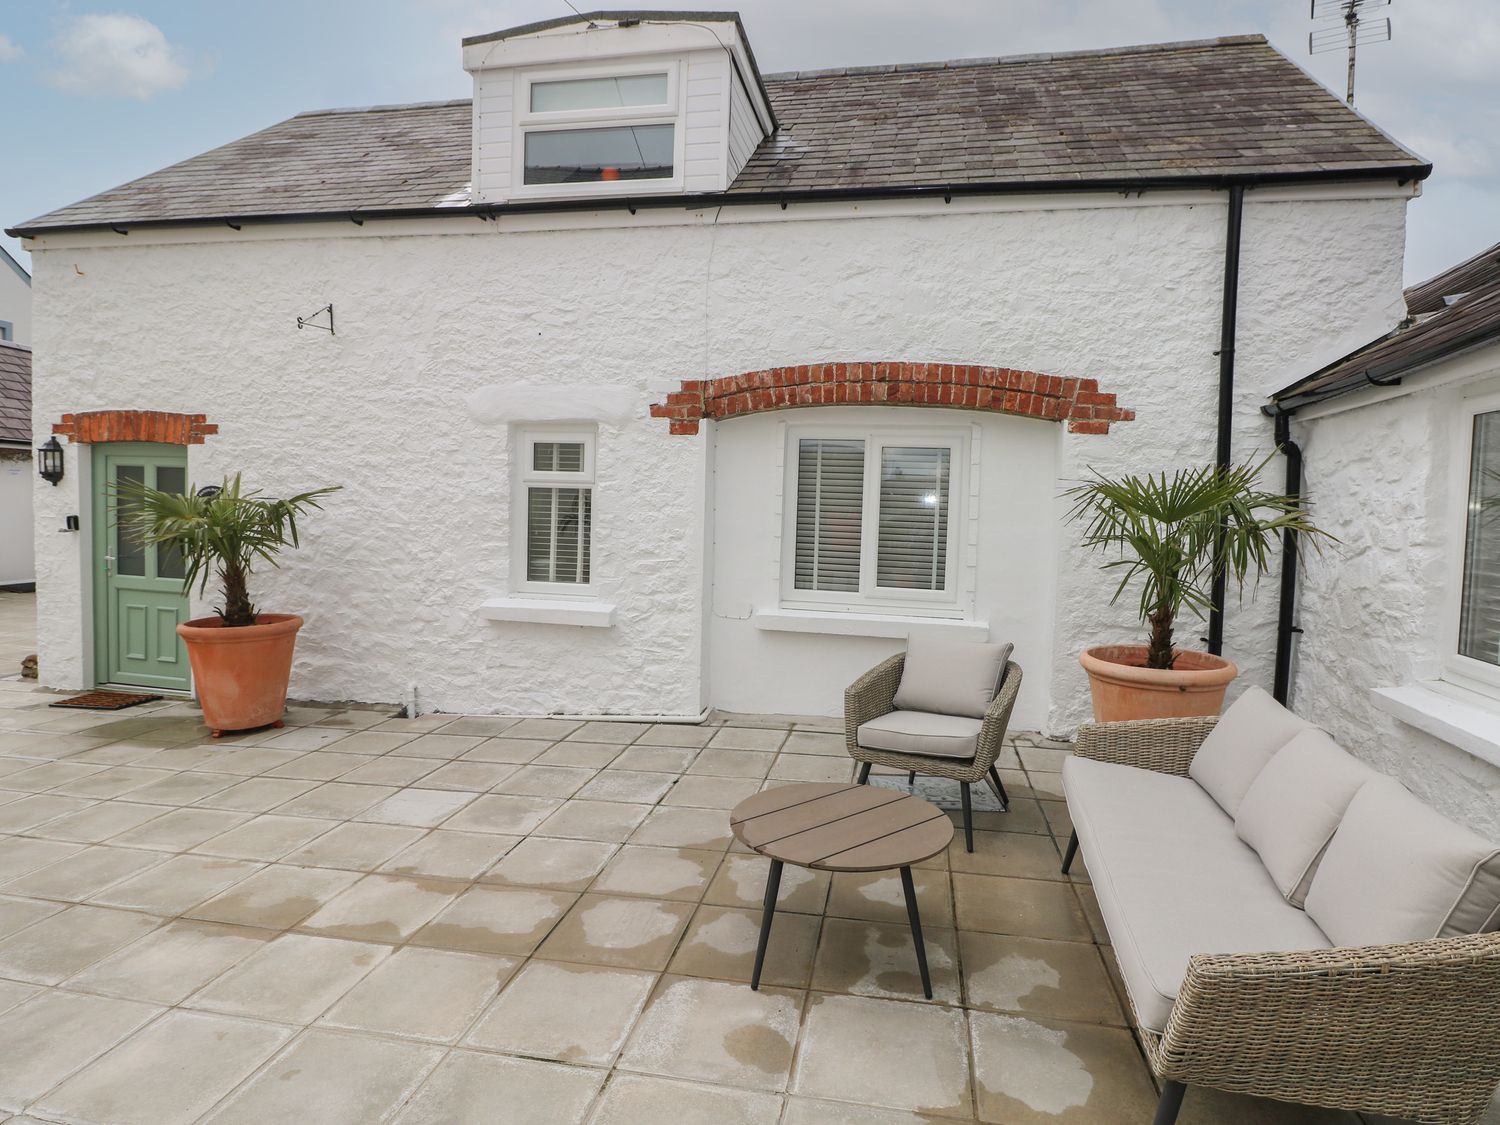 Rosemary Cottage - South Wales - 1104673 - photo 1